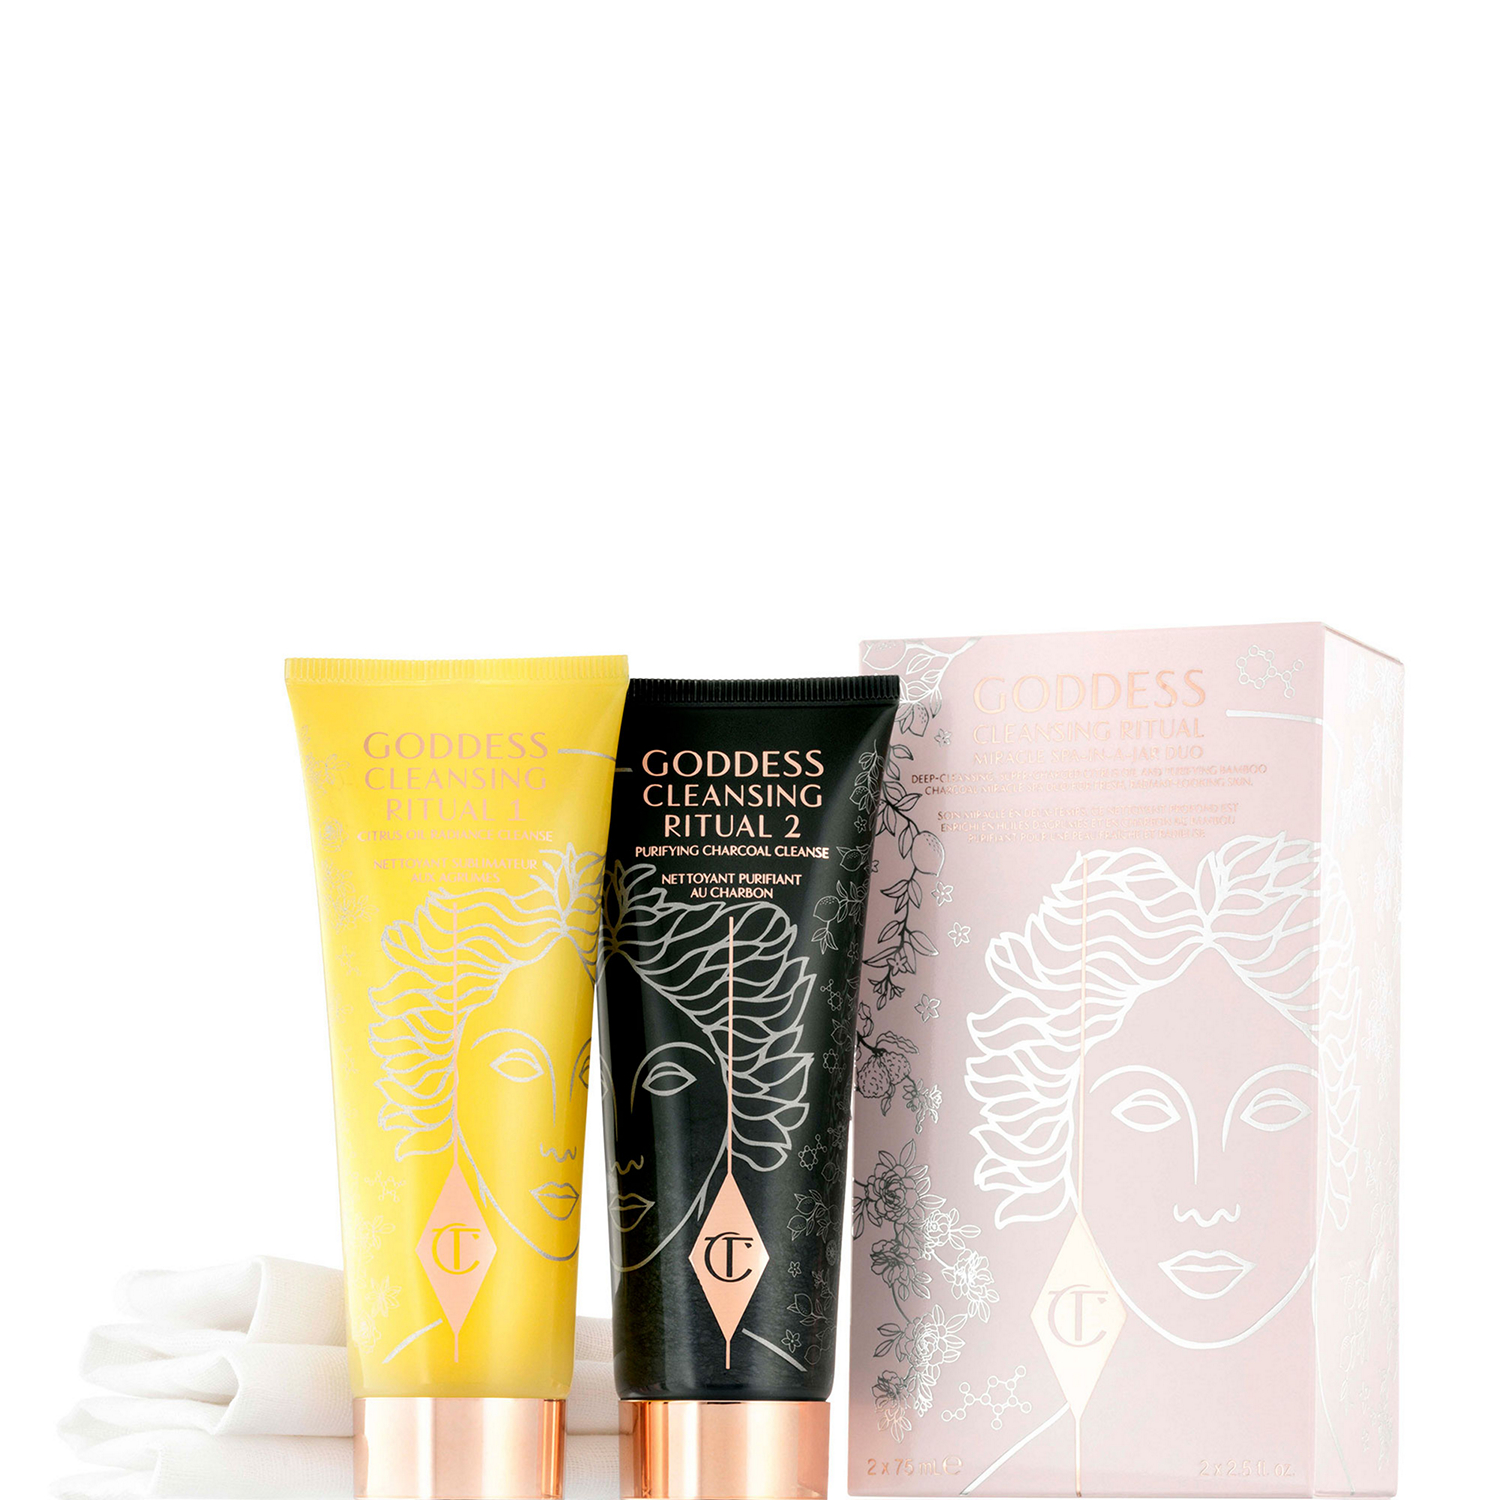 Goddess Cleansing Ritual A Miracle Spa In A Jar Duo